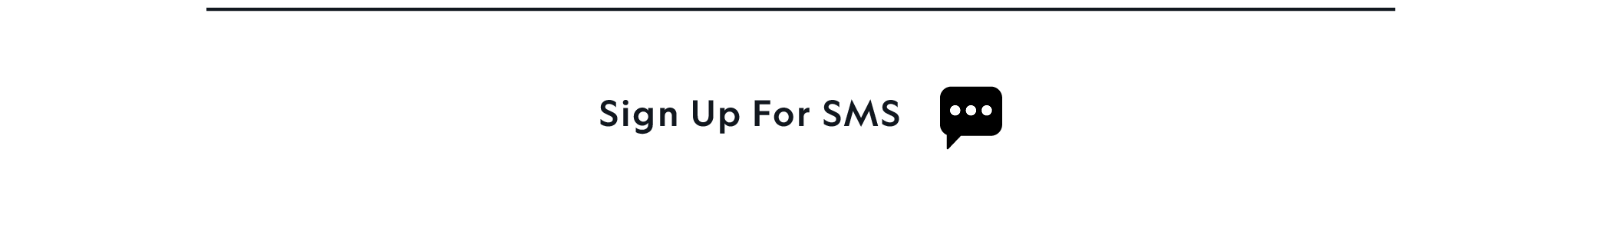 SIGN UP FOR SMS